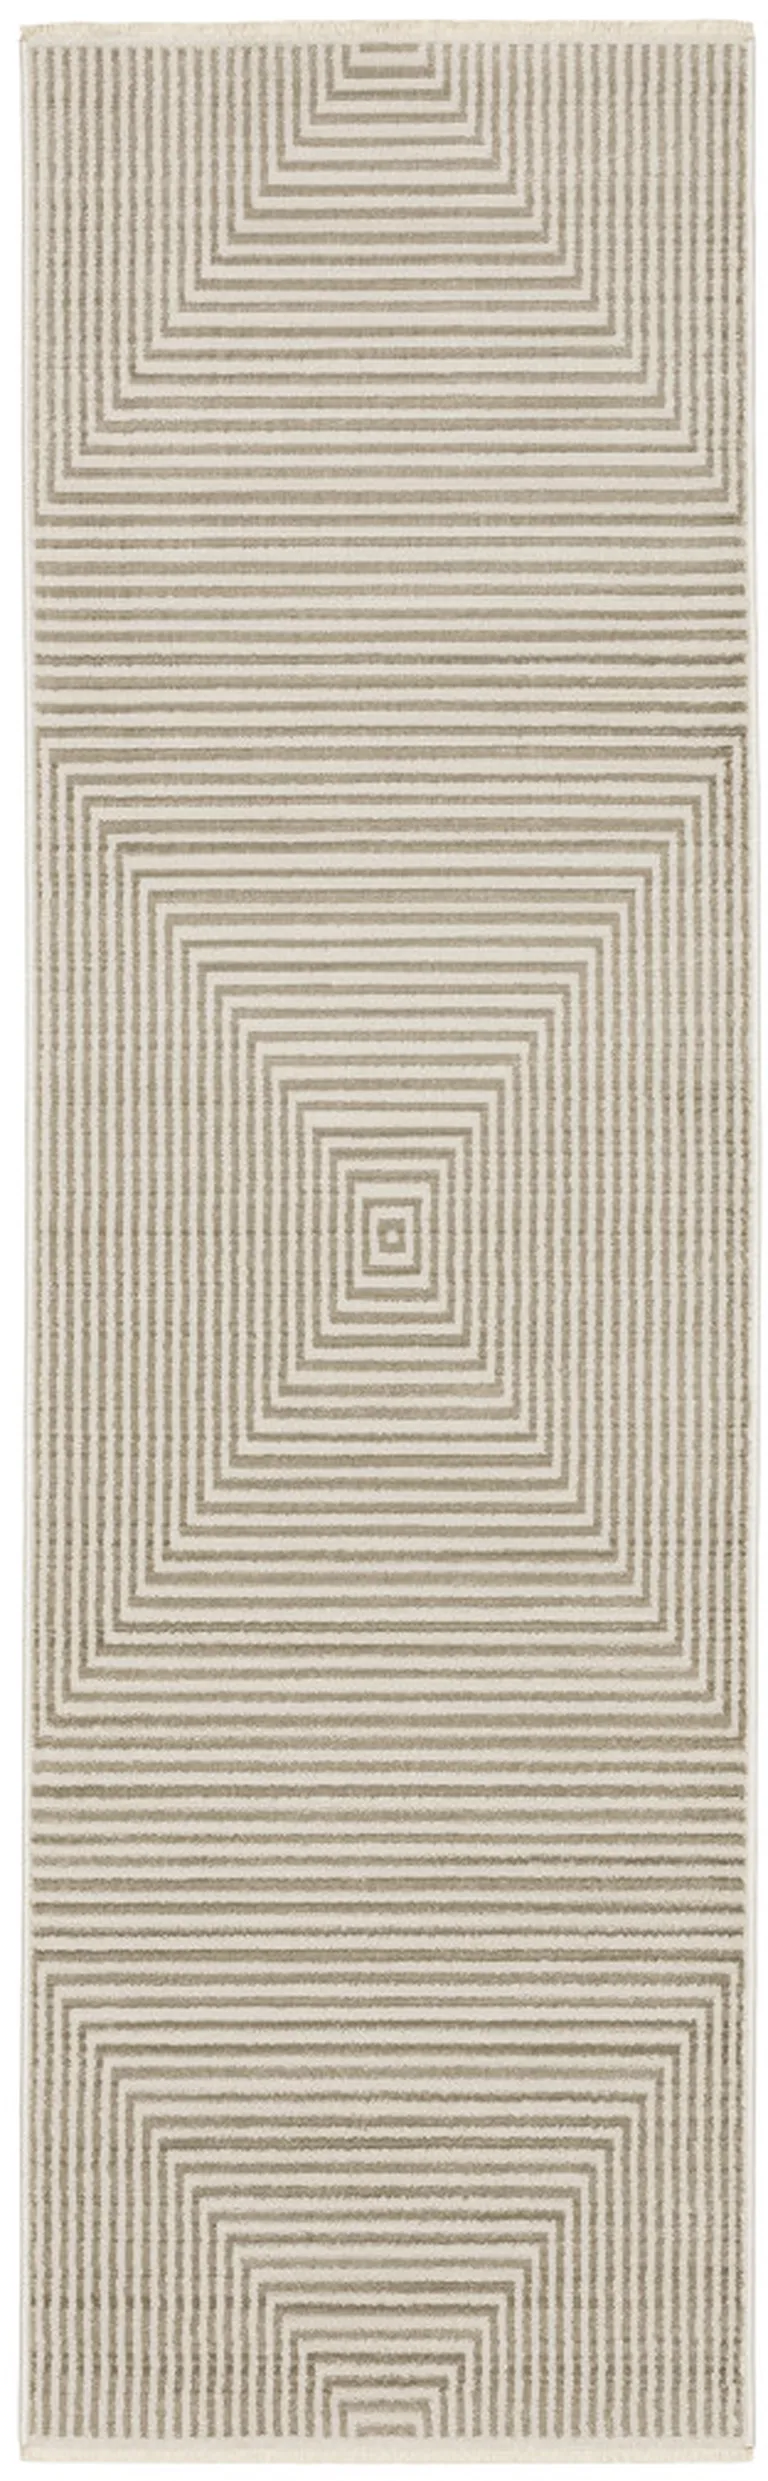 8' Ivory Beige Taupe And Tan Geometric Power Loom Runner Rug With Fringe Photo 1